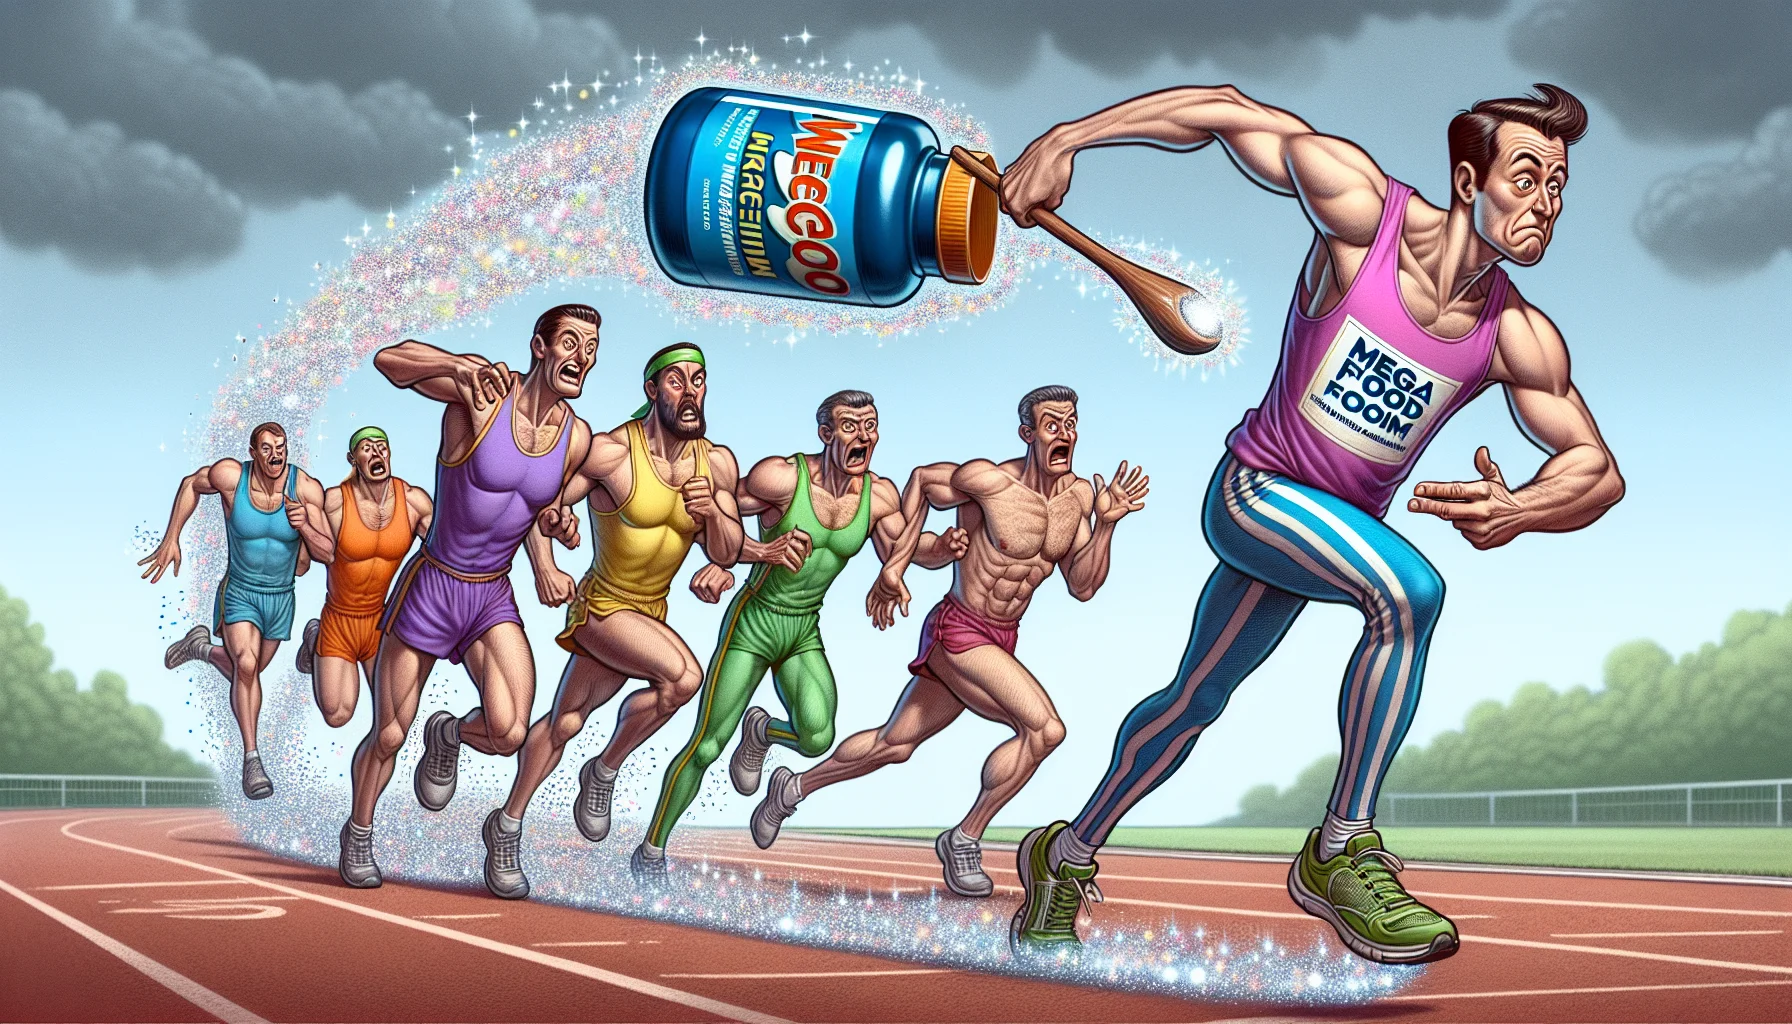 An image that humorously promotes the use of supplements for sports, specifically featuring 'mega food magnesium'. Picture this scenario- a comical skinny character, dressed in a vibrant jogging suit, racing against much more muscular and athletic looking individuals. In his hand, a magic wand-like object shaped like 'mega food magnesium' bottle. Each time the character waves the wand, a stream of sparkles trails behind, subtly transforming the track under his feet into a moving walkway. Despite his less athletic physique, with the 'magic' of his supplement, he's easily keeping up, even enjoying a relaxed, cool gaze towards the bewildered competitors. His expression conveys 'It's not just physical training; proper nutrition matters too!'.